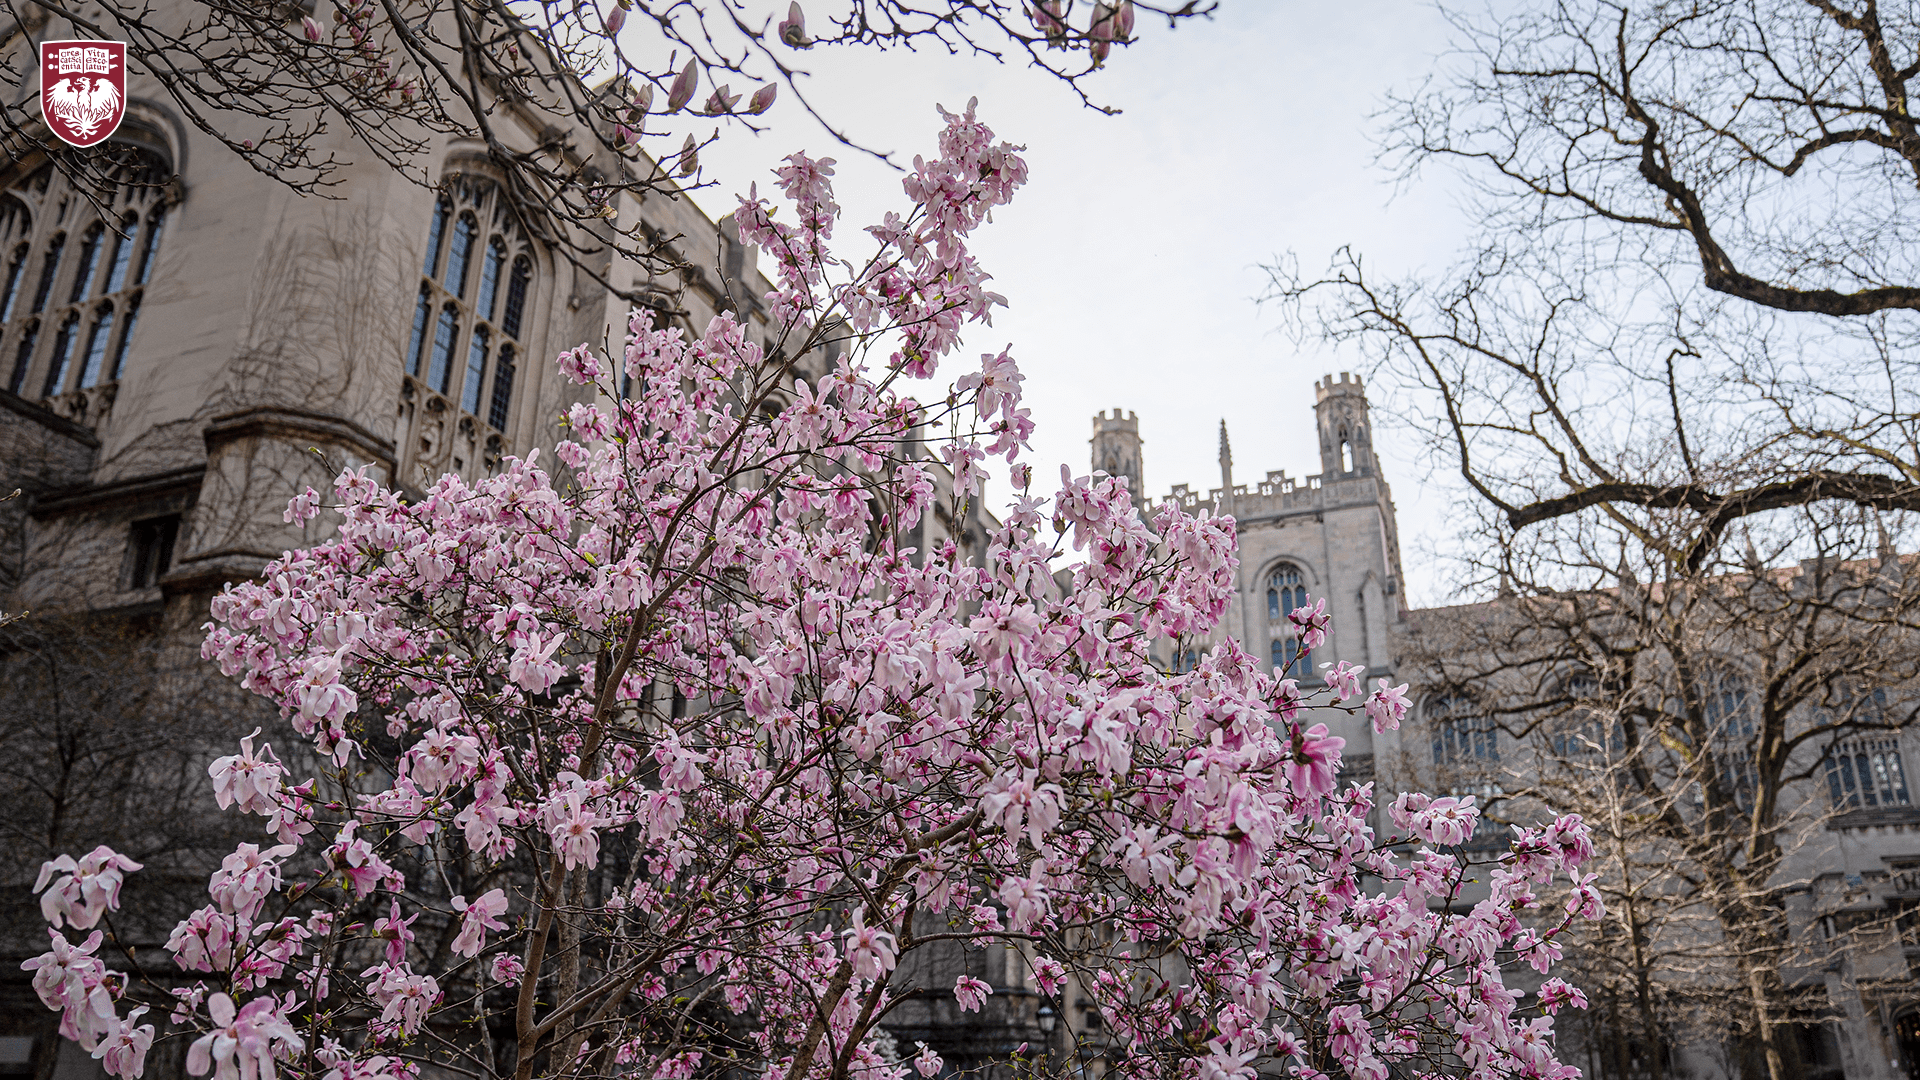 Pink flower blossoms on tree branches with a gothic stone building in the background